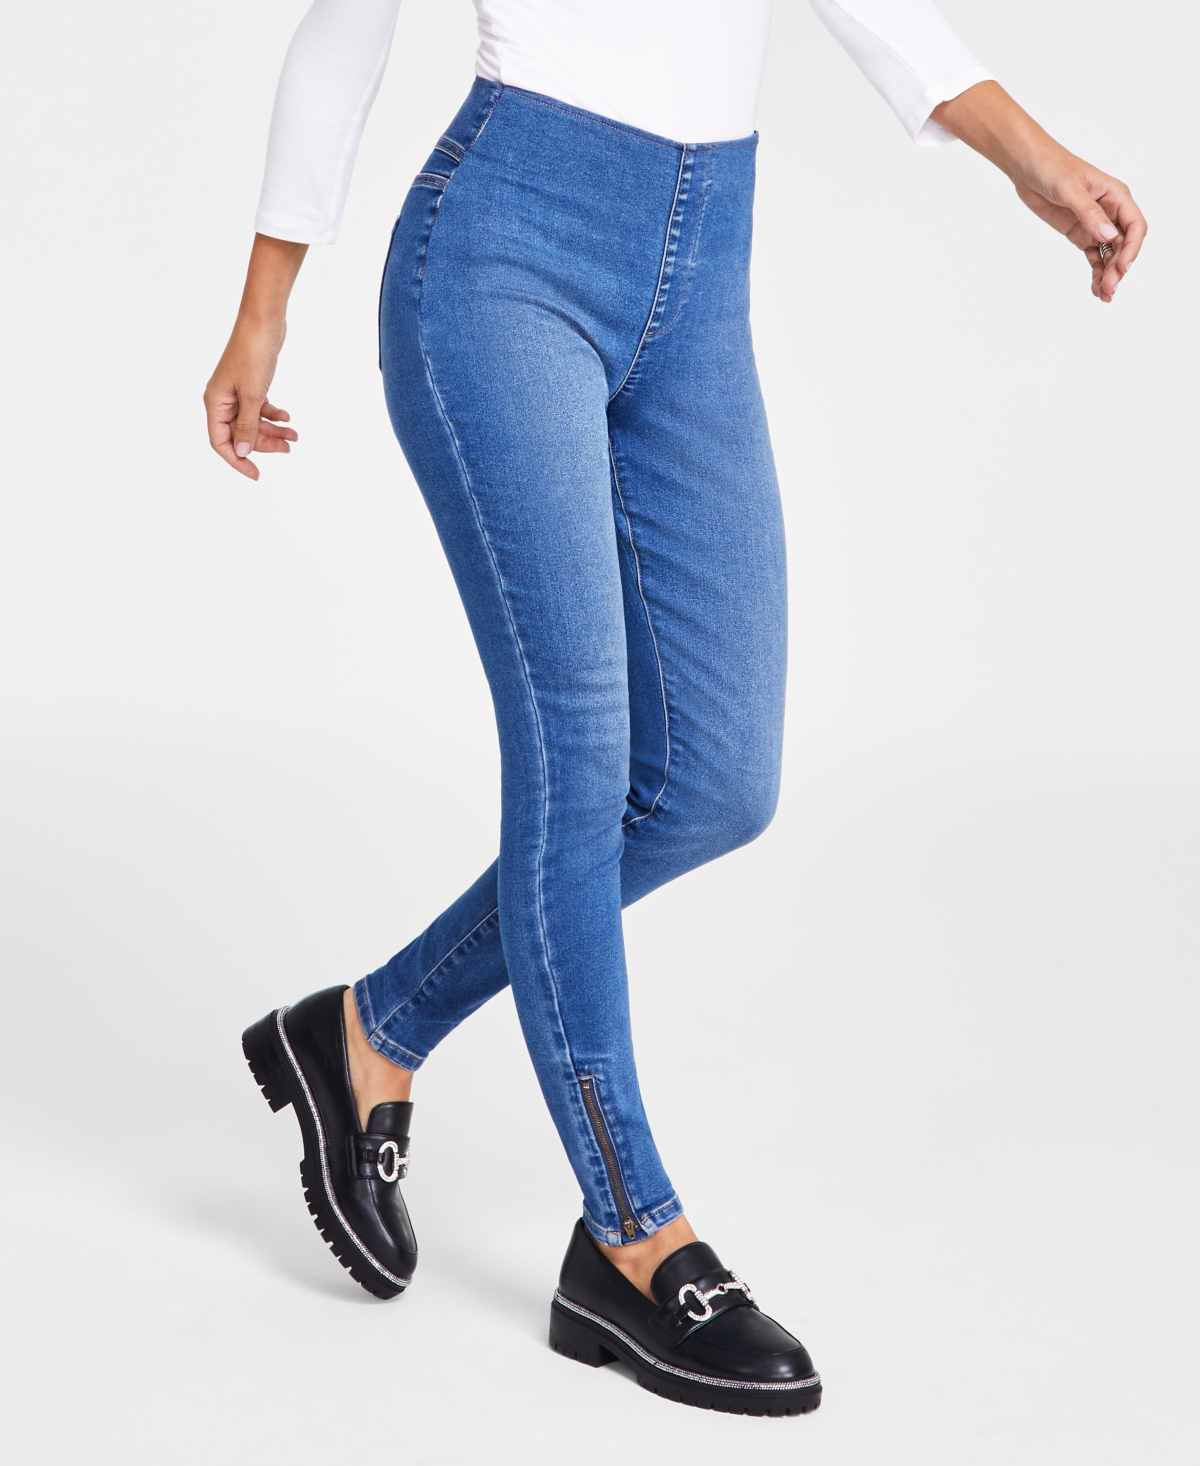 INC INTERNATIONAL CONCEPTS PETITE MID-RISE PULL-ON SIDE-ZIP SKINNY JEANS, CREATED FOR MACY'S